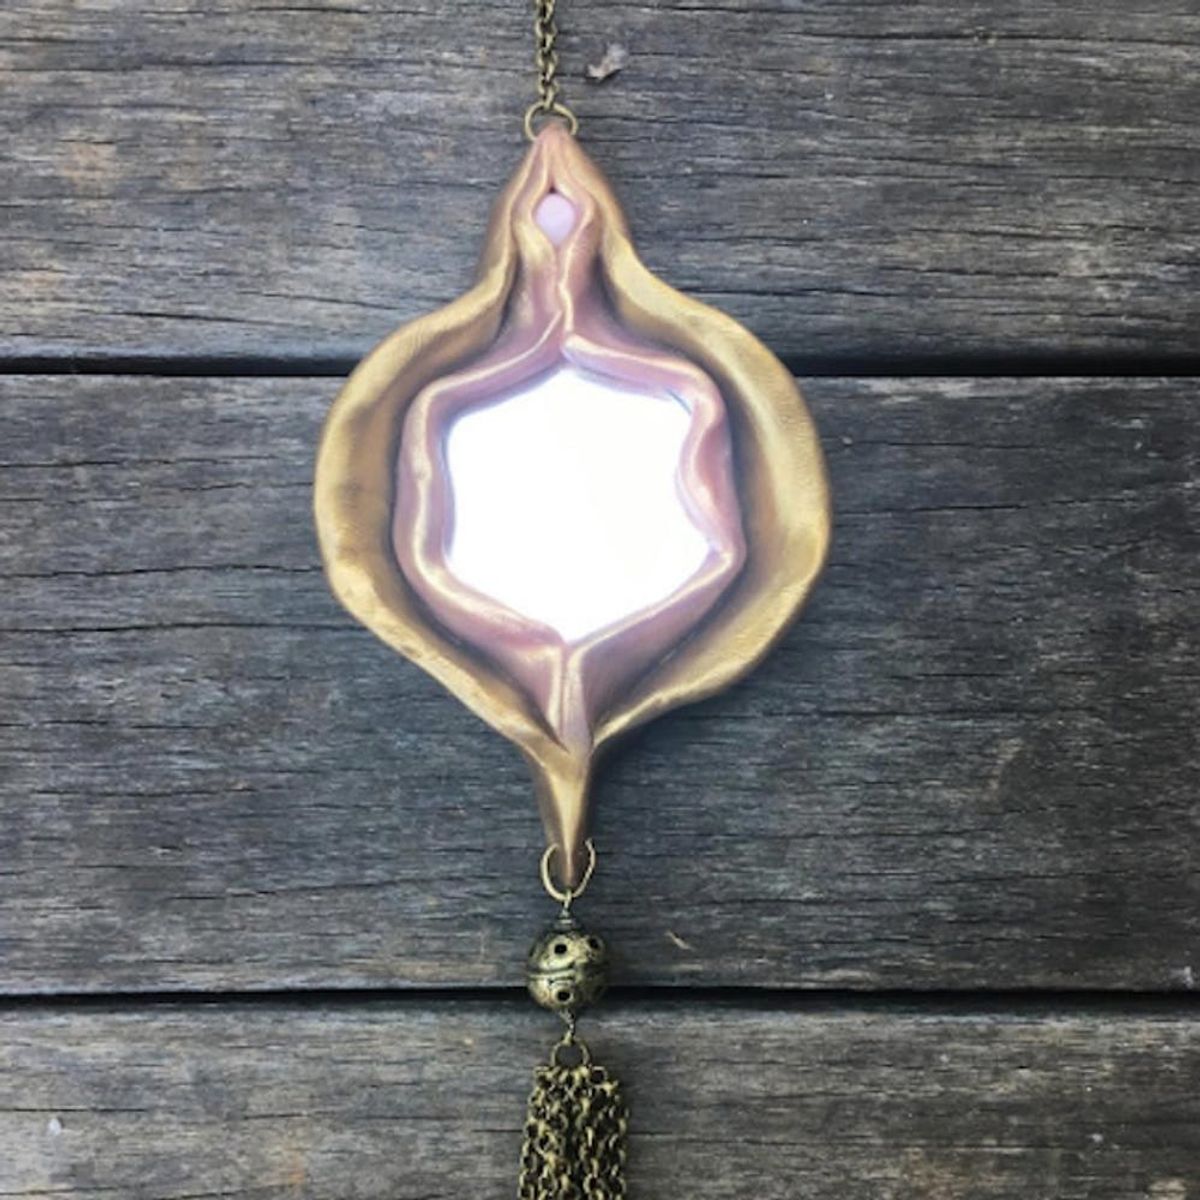 This Necklace Meant to Resemble Your Lady Parts Is Going Viral